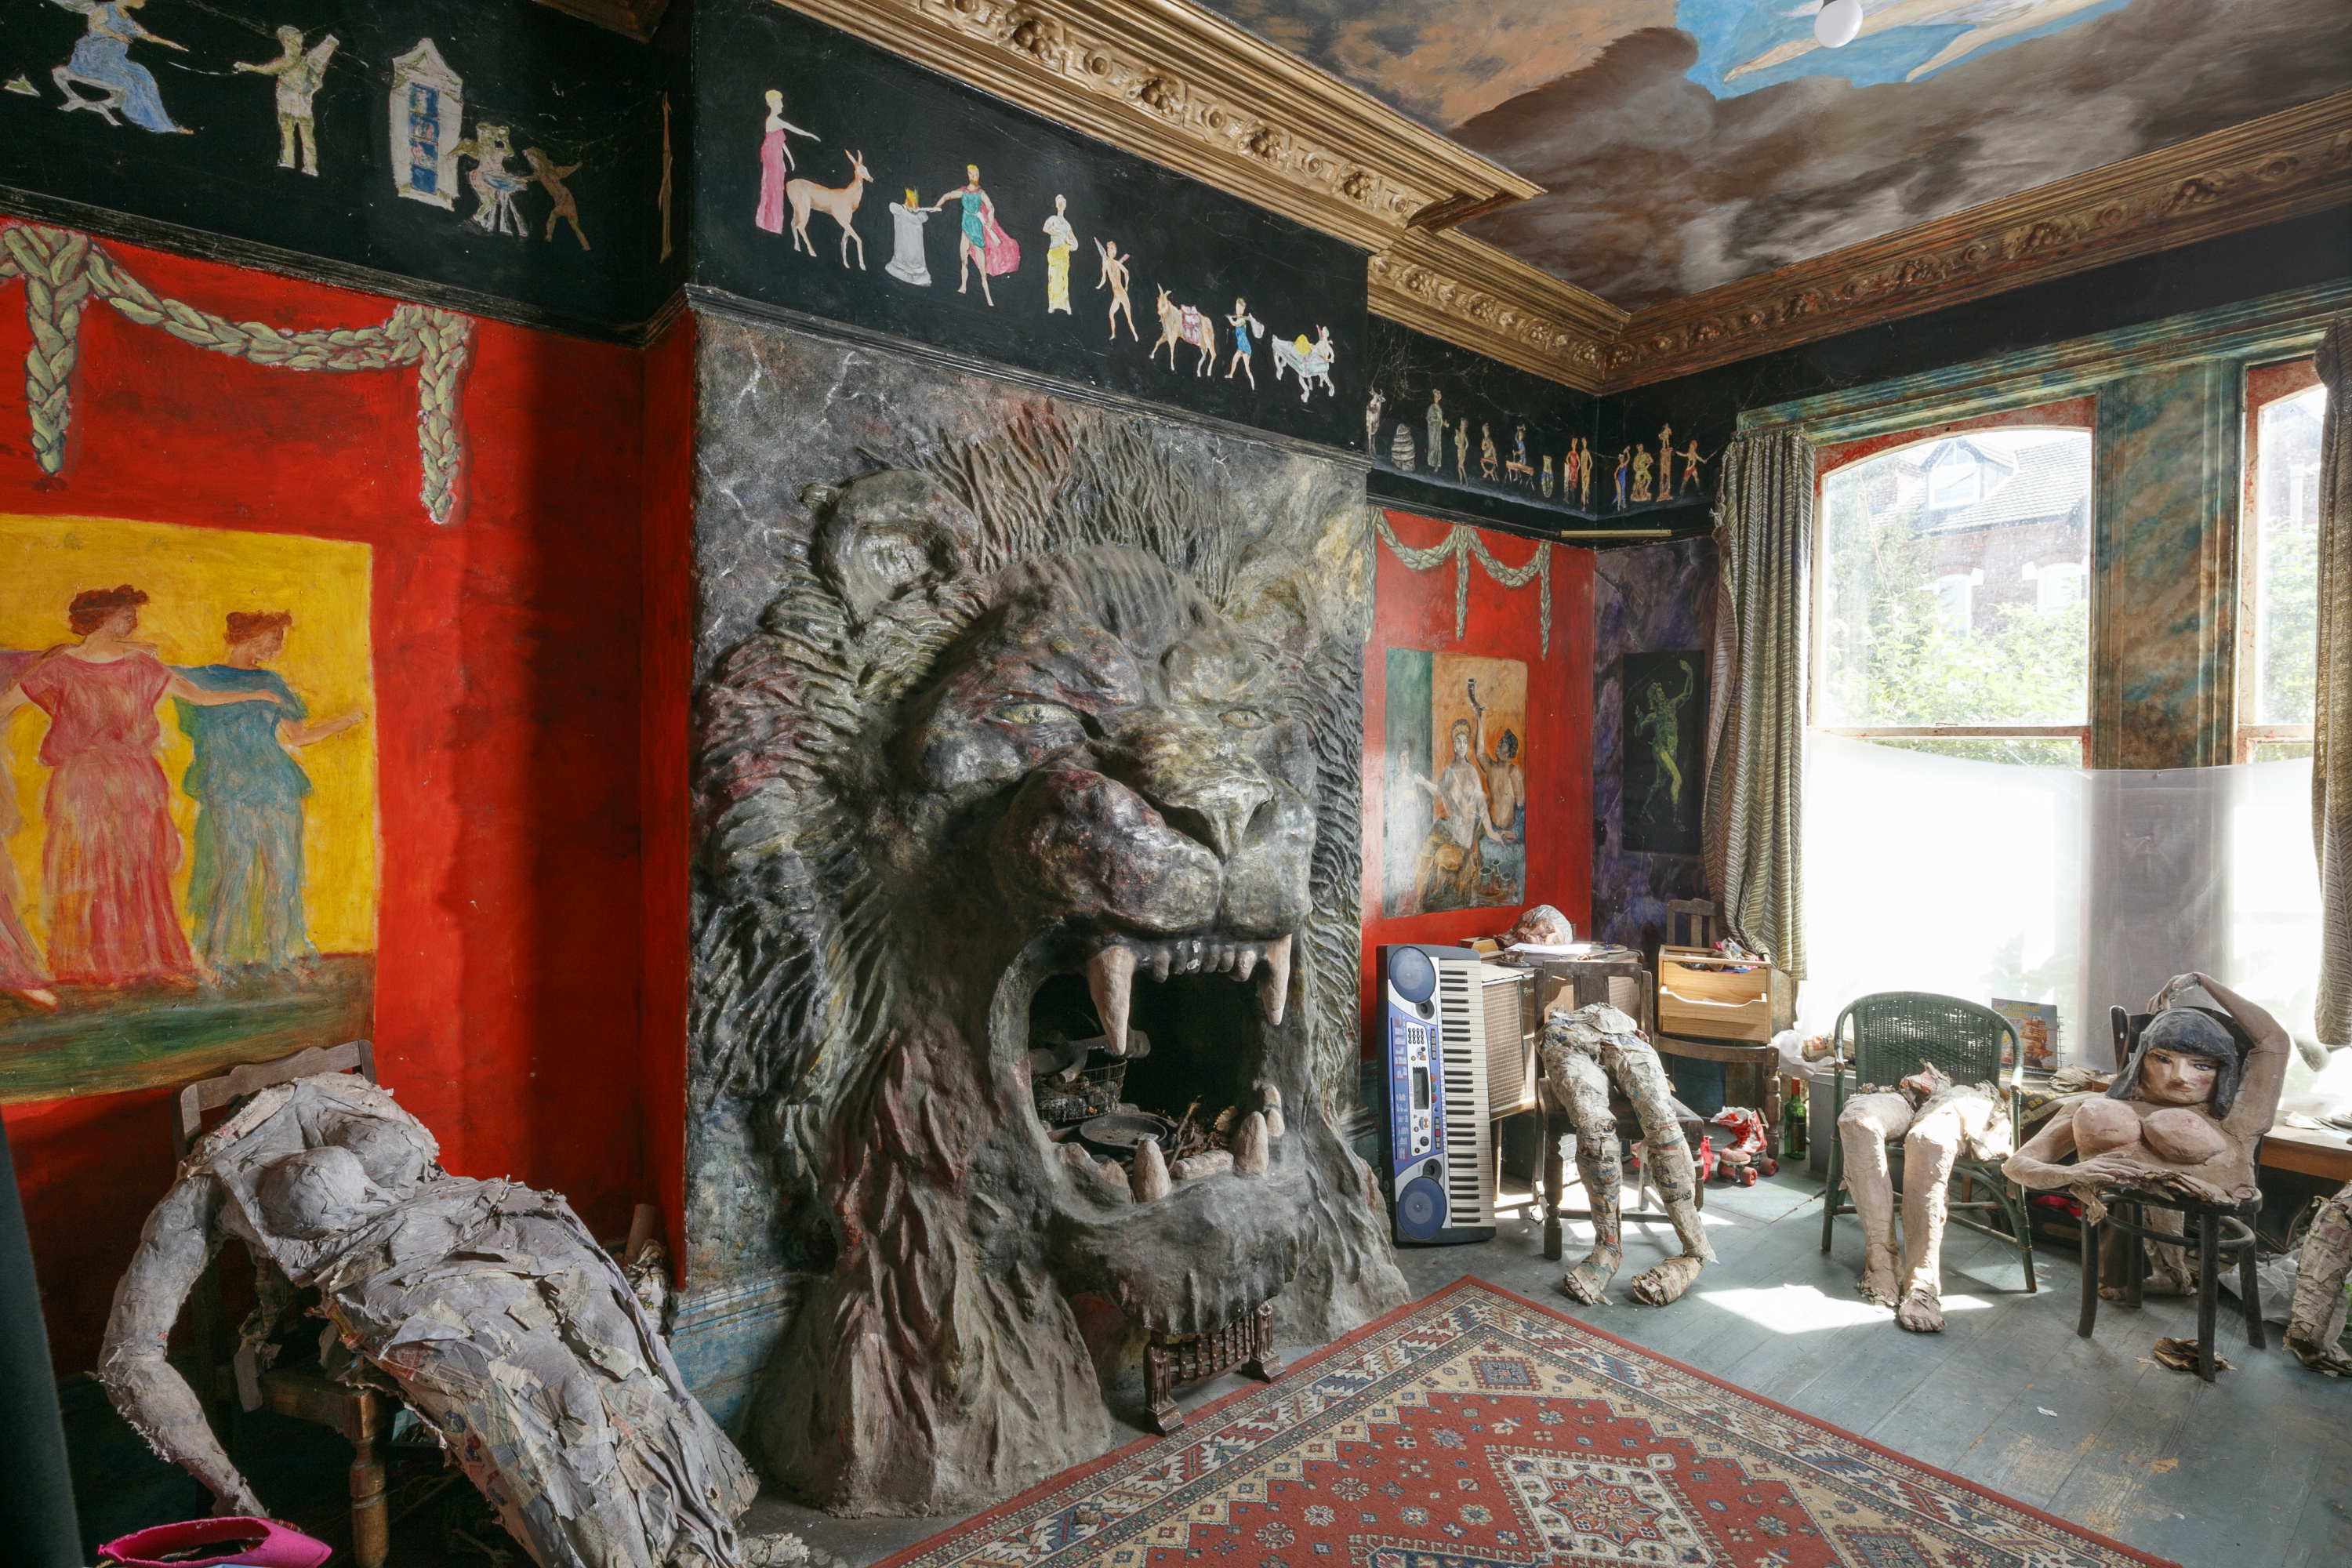 he built a ‘fantasy world’ in his apartment. it’s now a historic site.